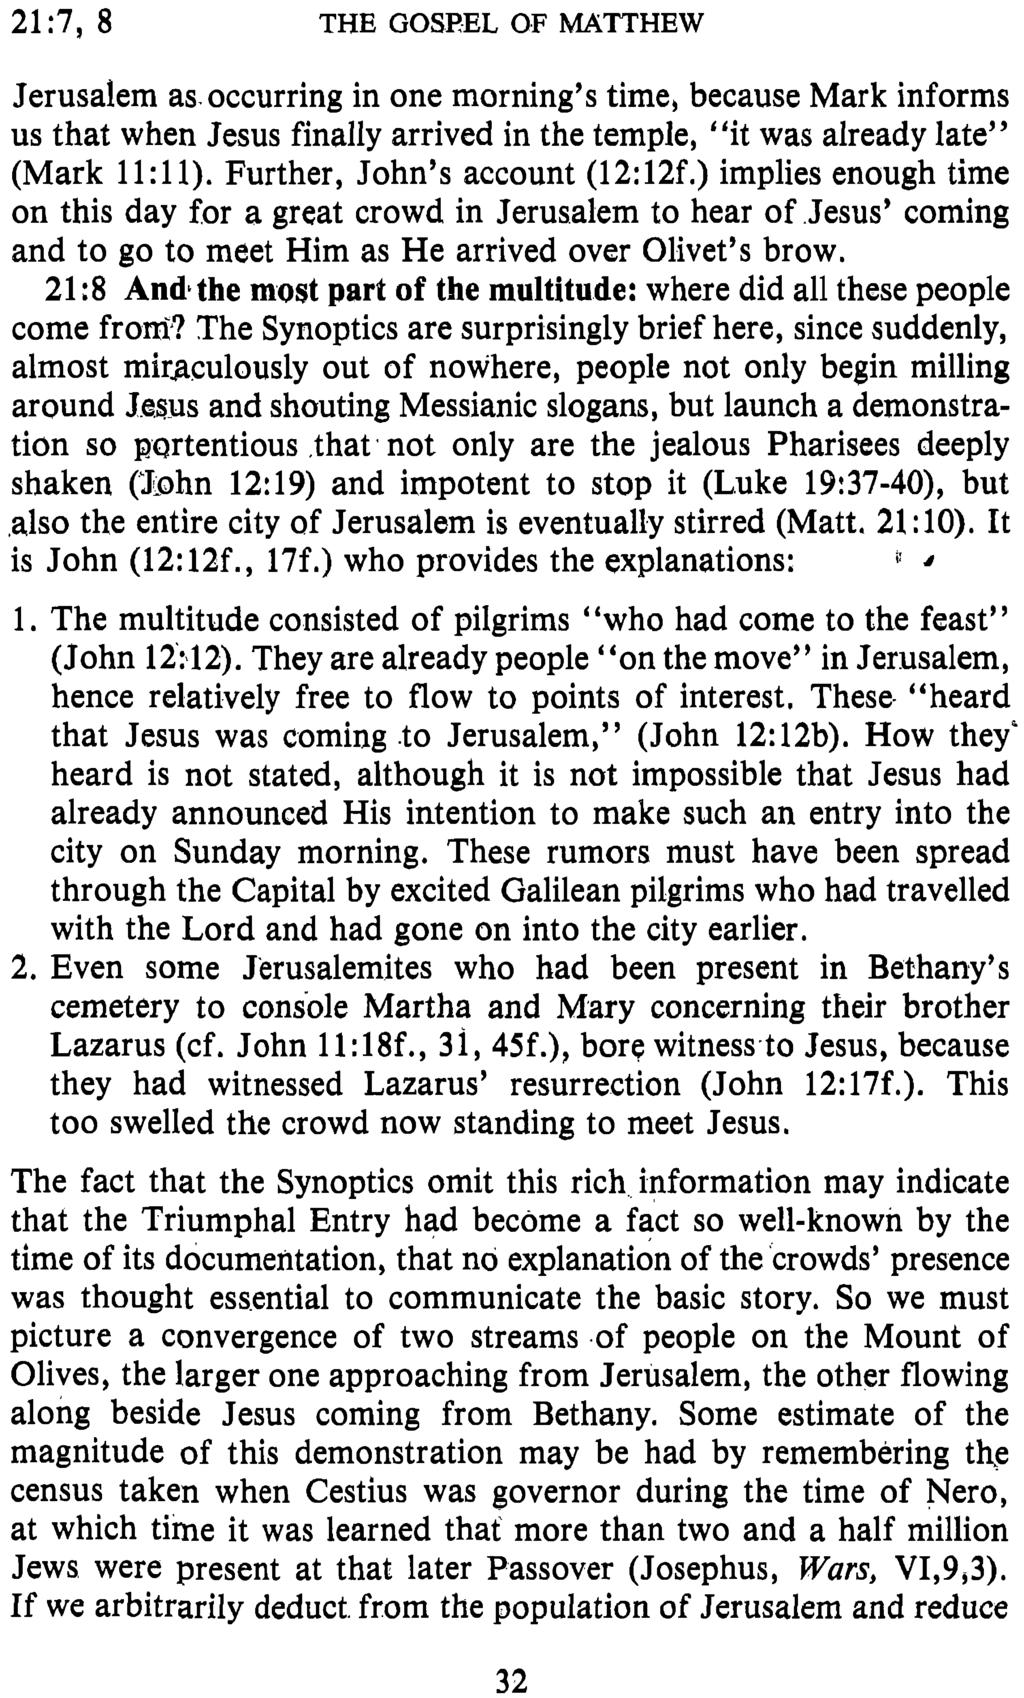 21:7, 8 THE GOSPEL OF MATTHEW Jerusalem as occurring in one morning s time, because Mark informs us that when Jesus finally arrived in the temple, it was already late (Mark 11:ll).